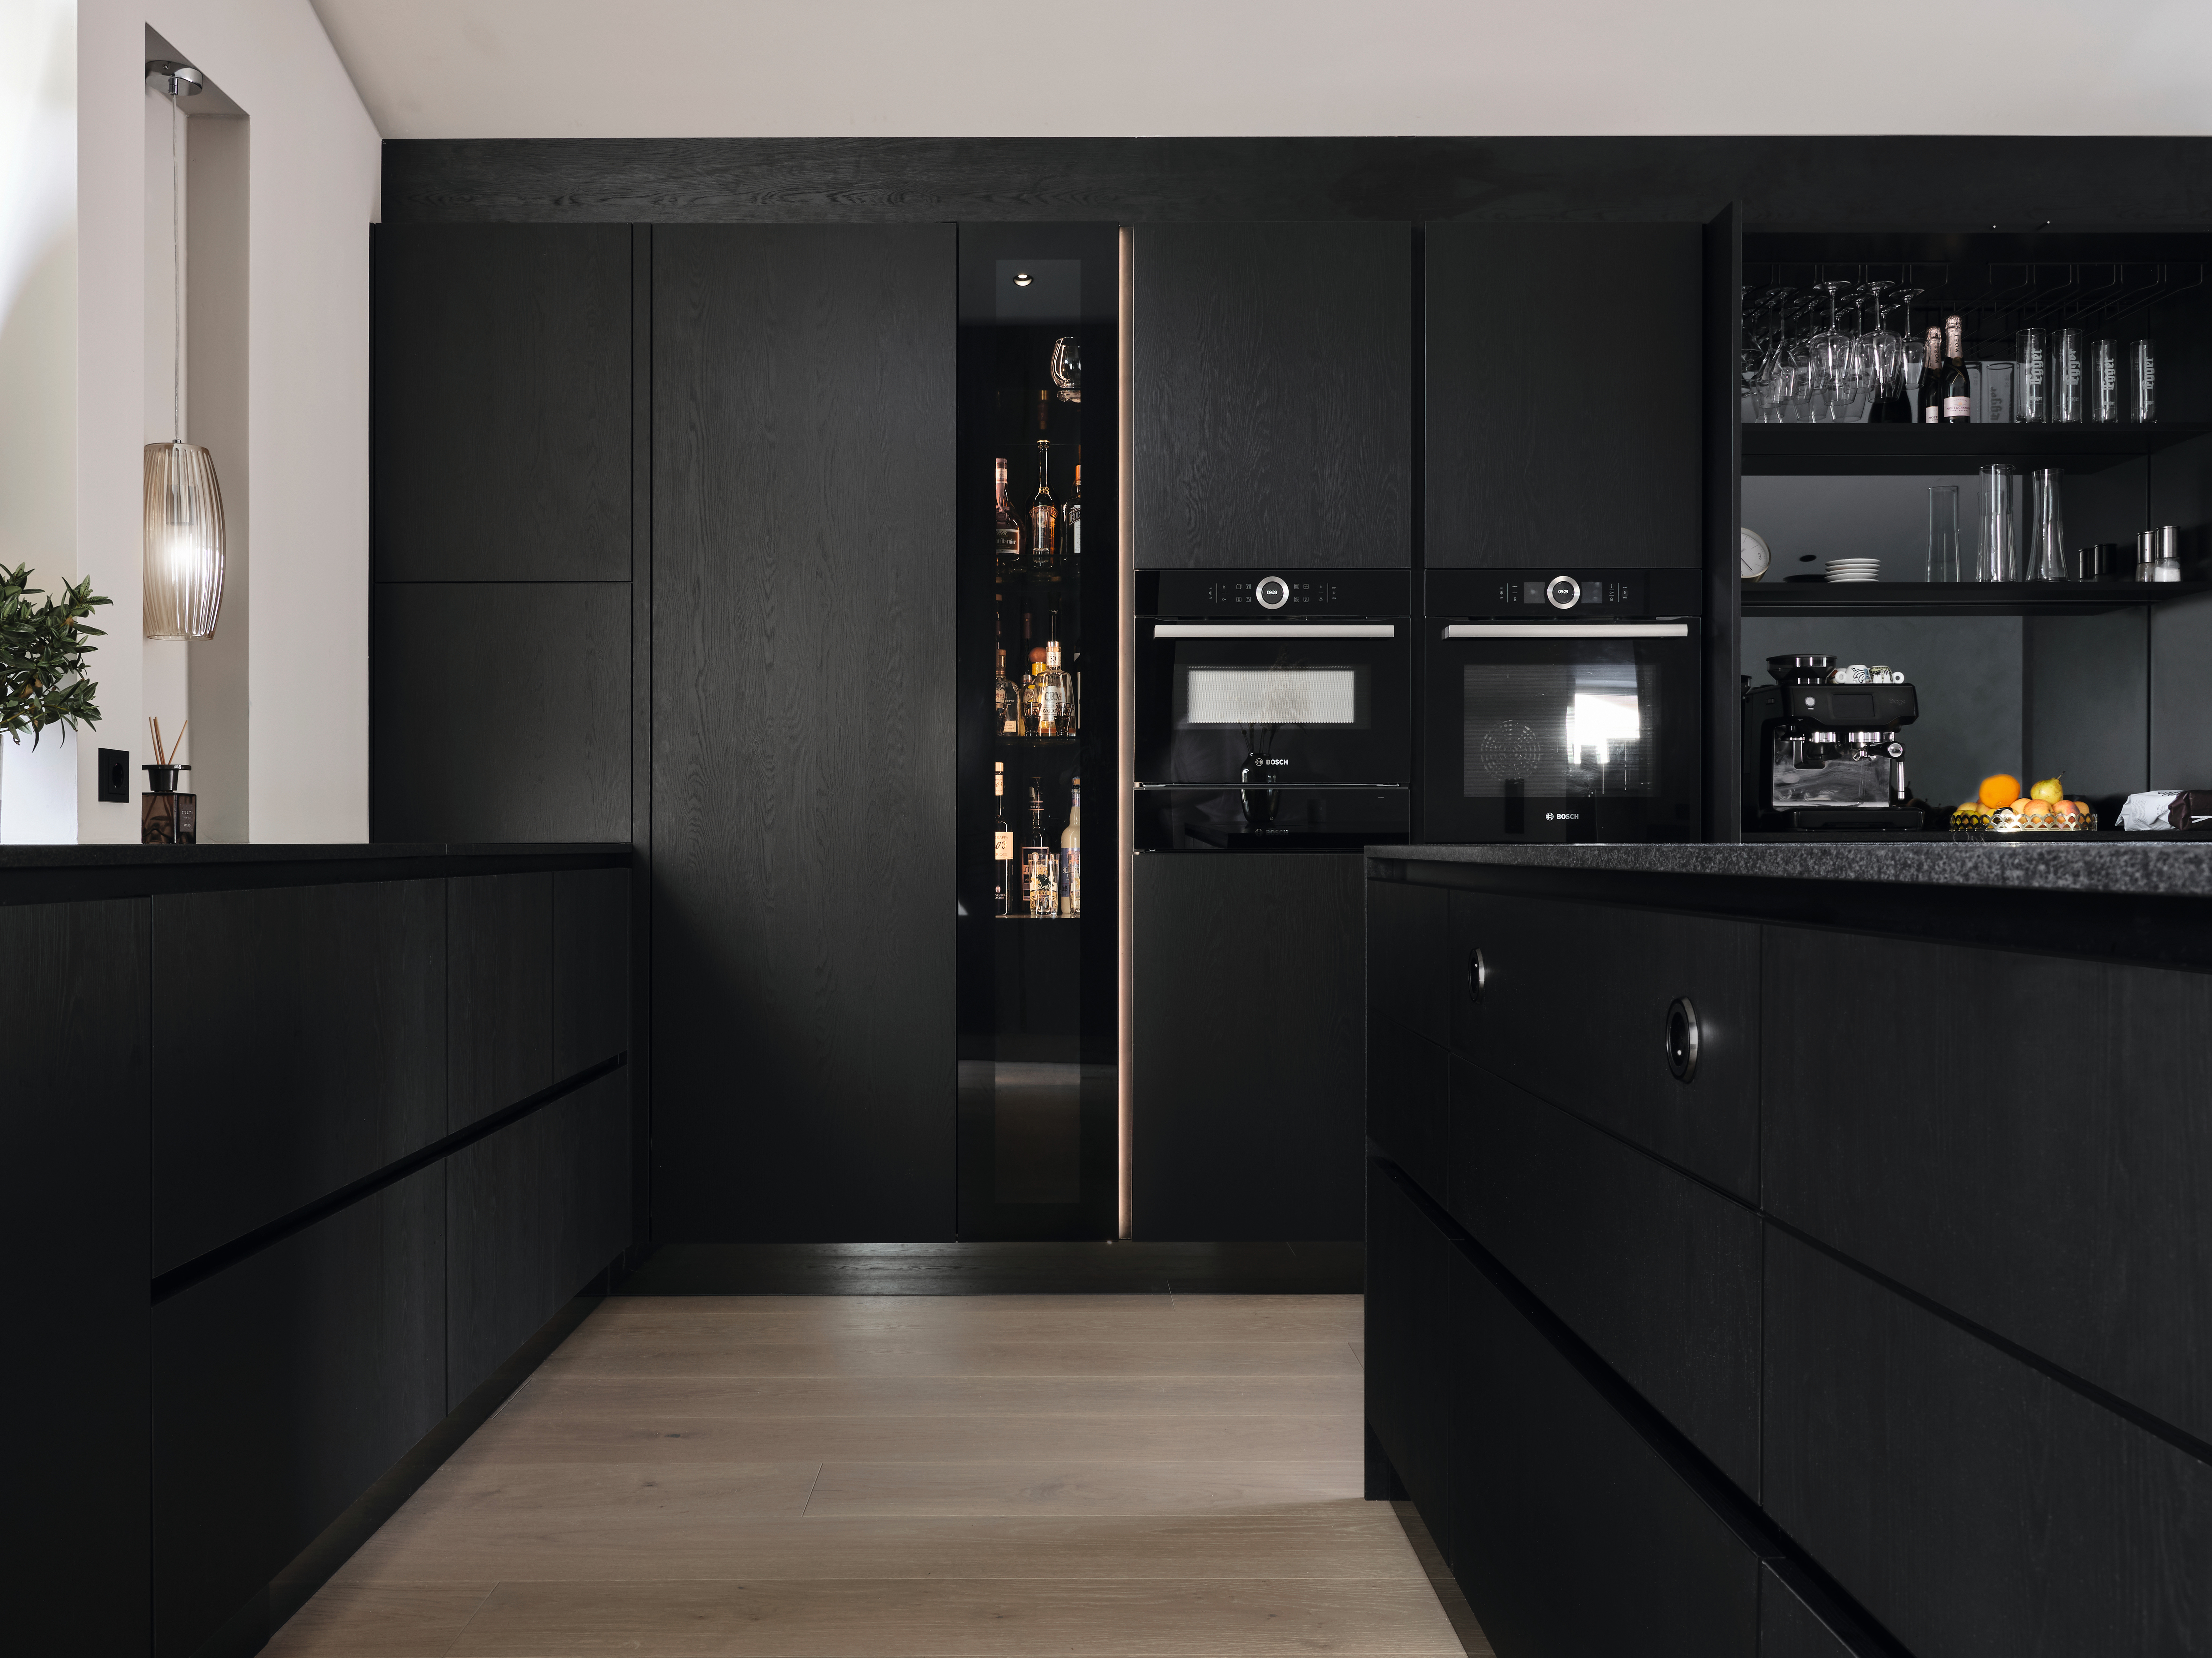 The black fronts give the kitchen a modern touch.